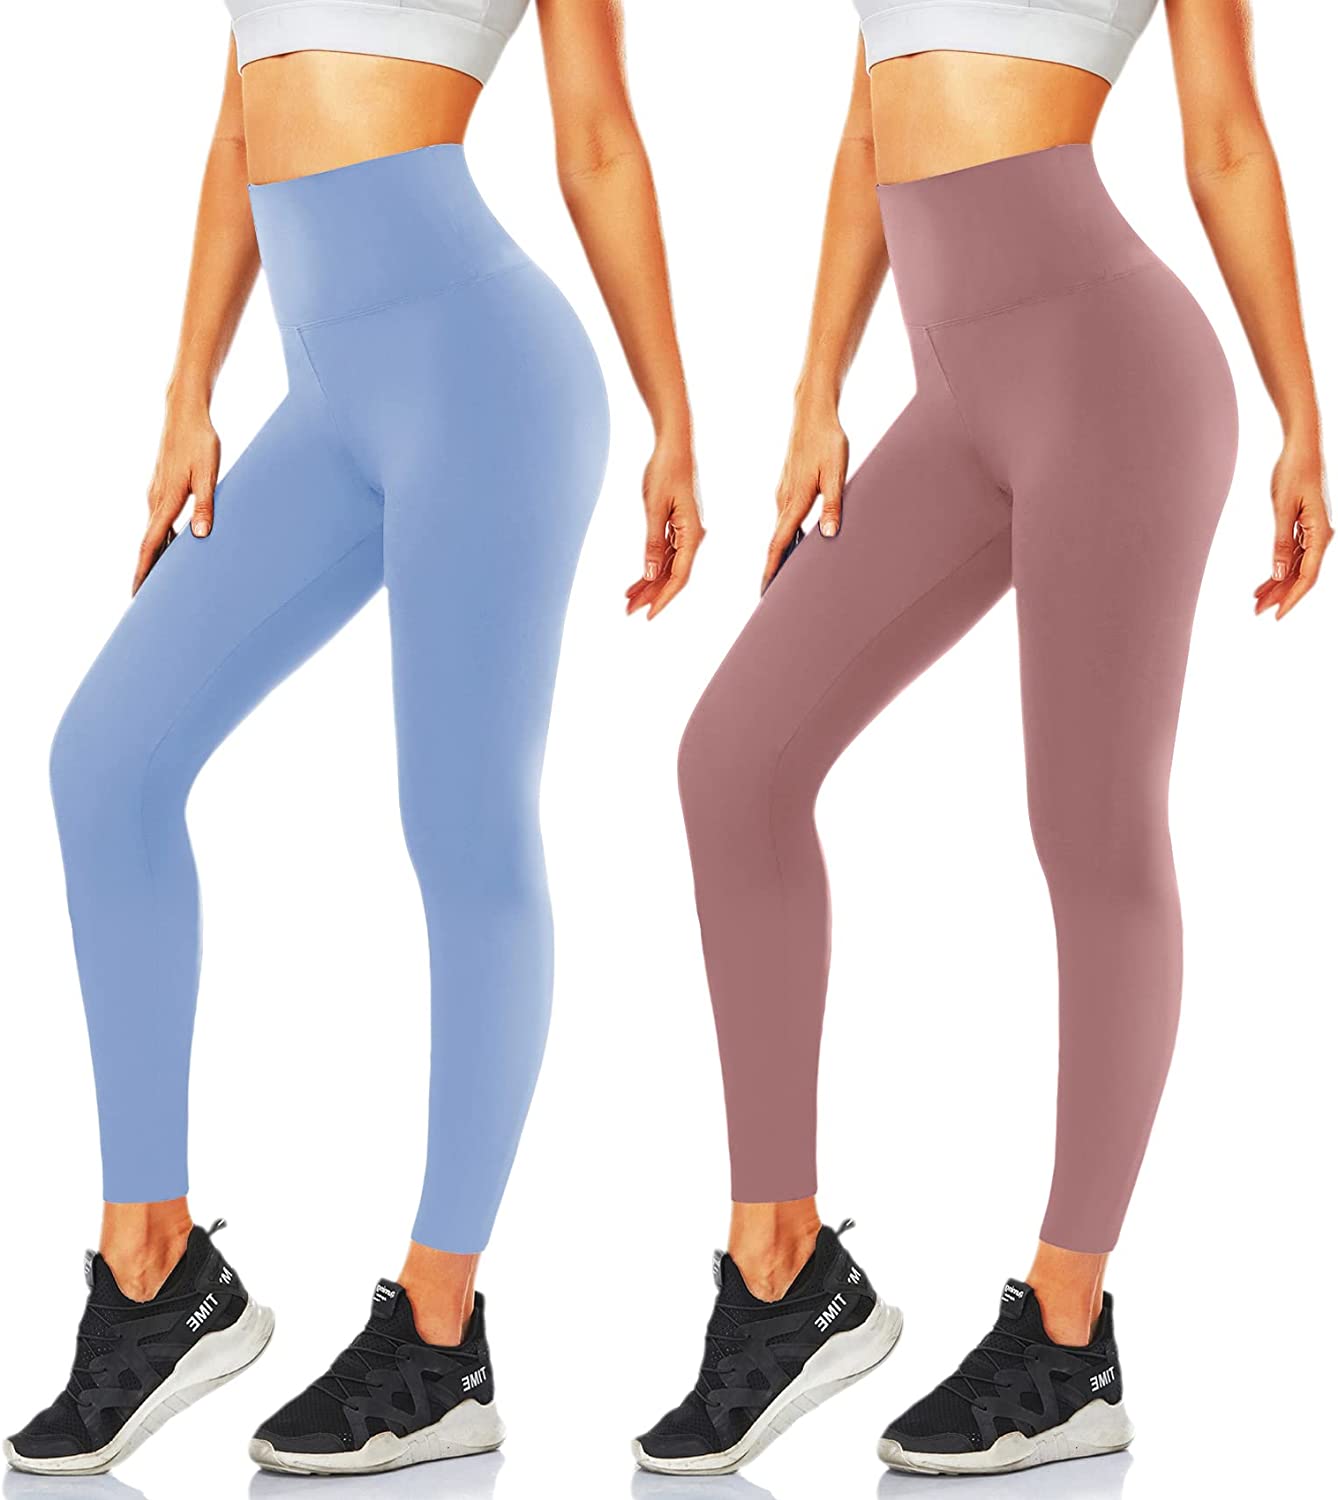 CTHH 2 Pack Leggings for Women Tummy Control-High Waist Non See